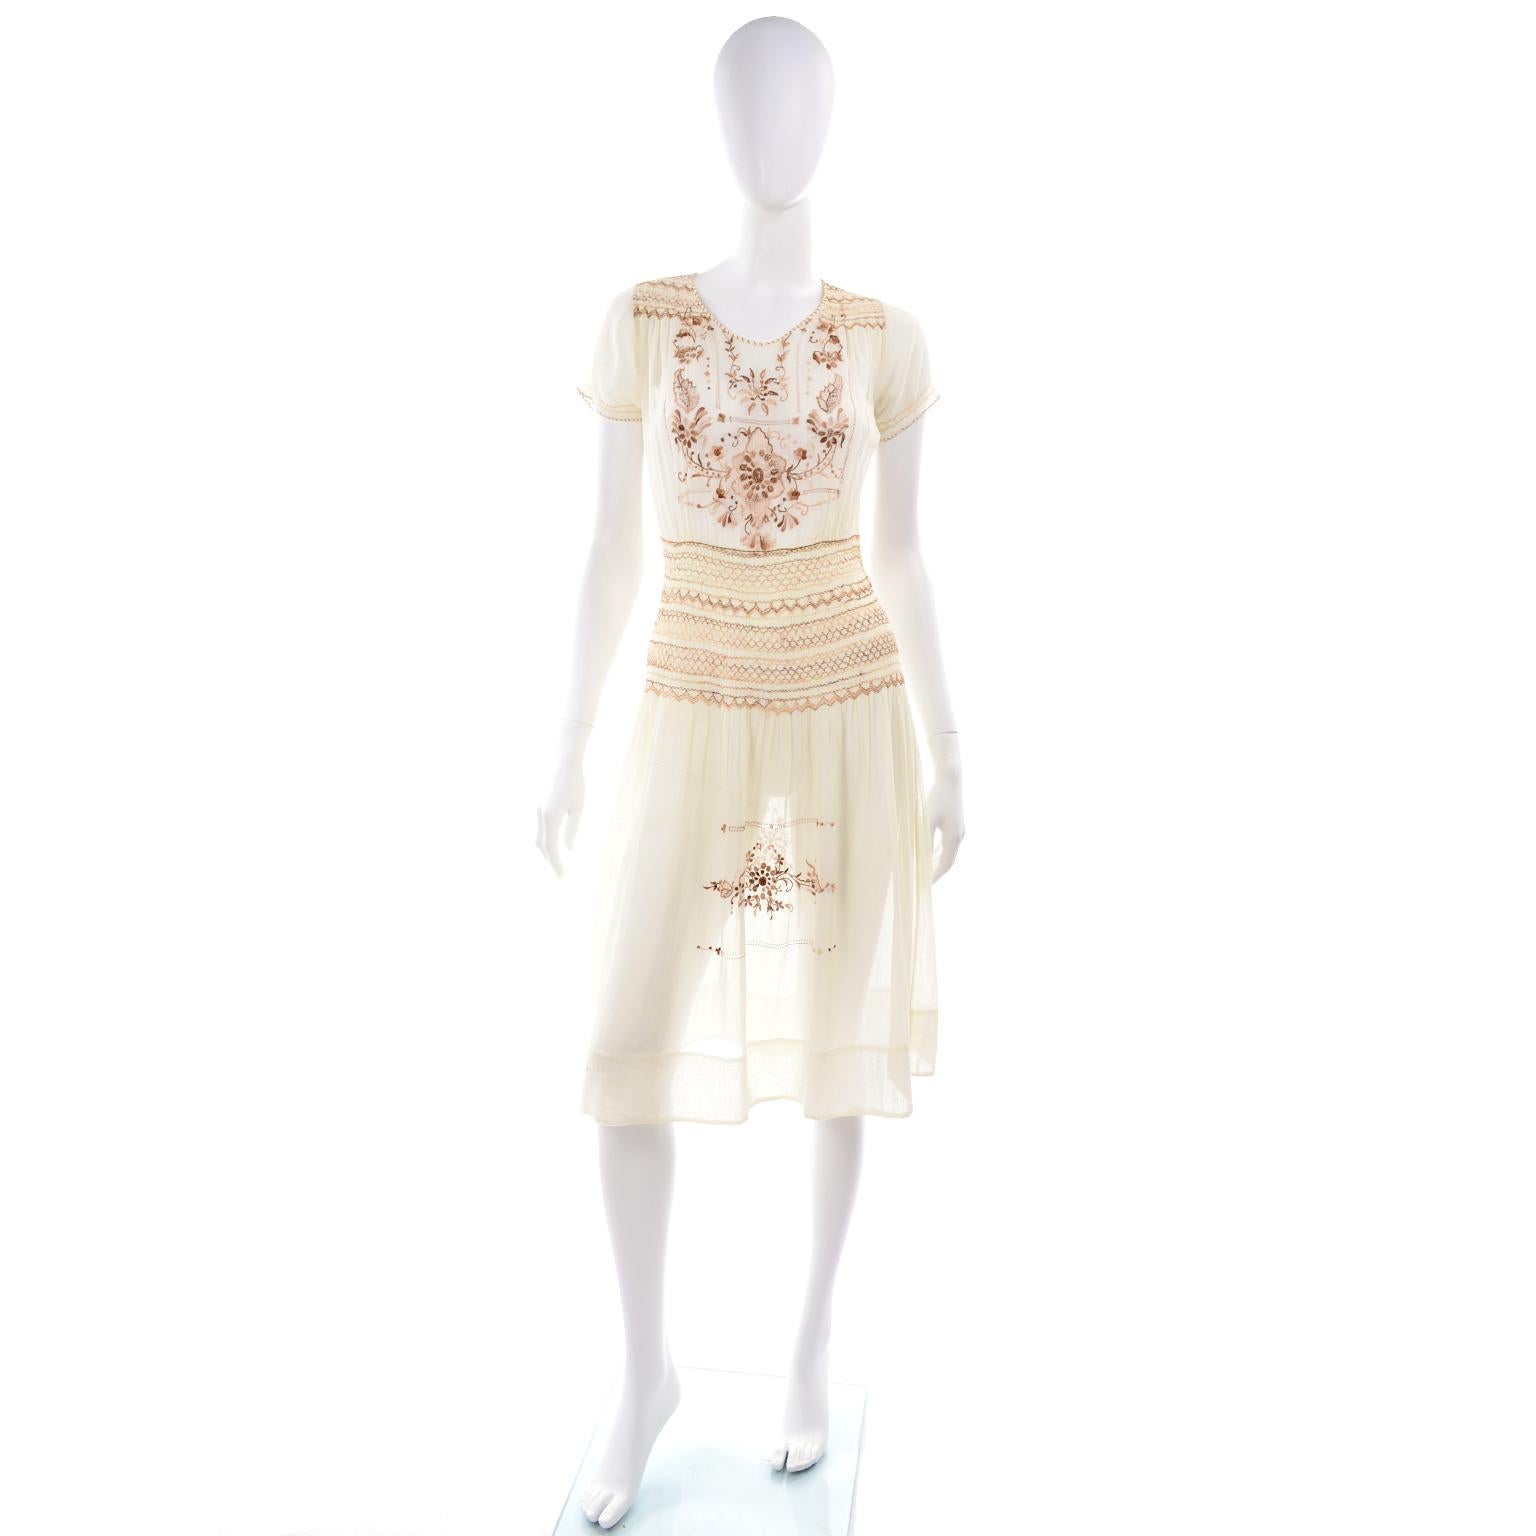 This is a pretty vintage 1920's Hungarian peasant dress. This dress is made of embroidered cream cotton voile and has rows of decorative smock pleating at the waist and on the short sleeves.. This lightweight vintage dress has brown, peach, and tan